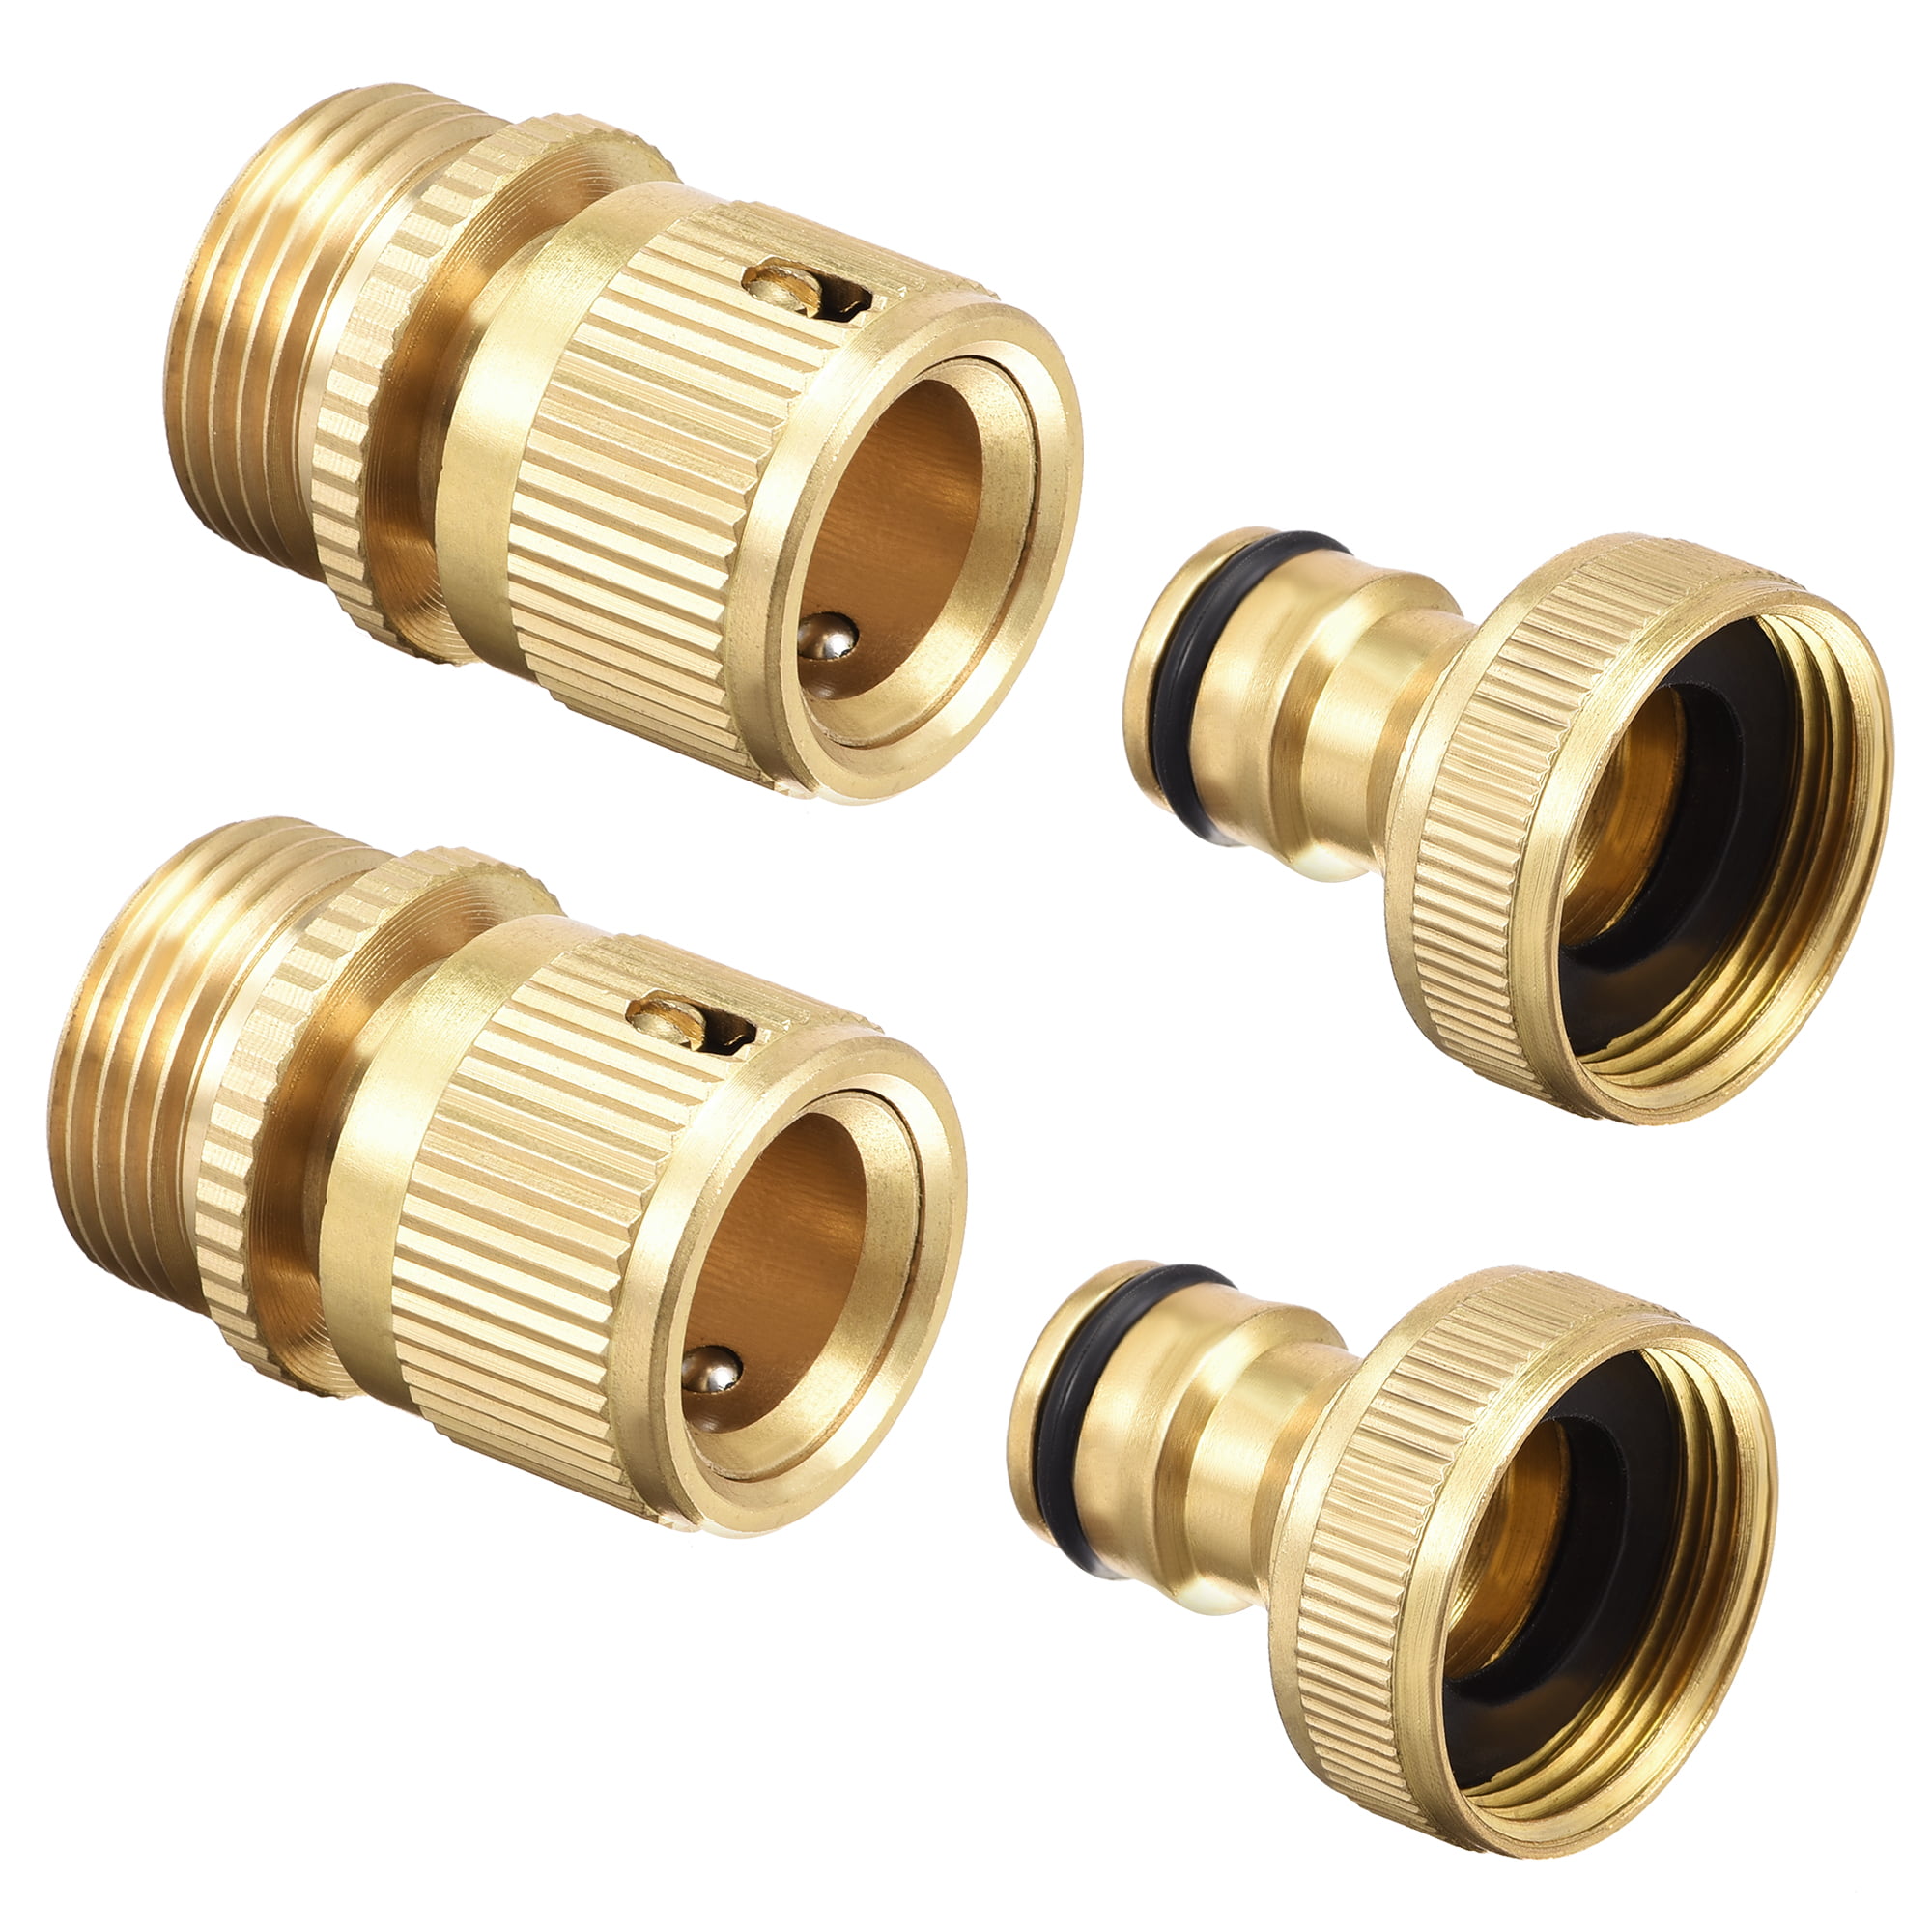 Details about   9XUniversal 3/4' Pressure Washer Tap Adapter Connector Garden Hose Quick Connect